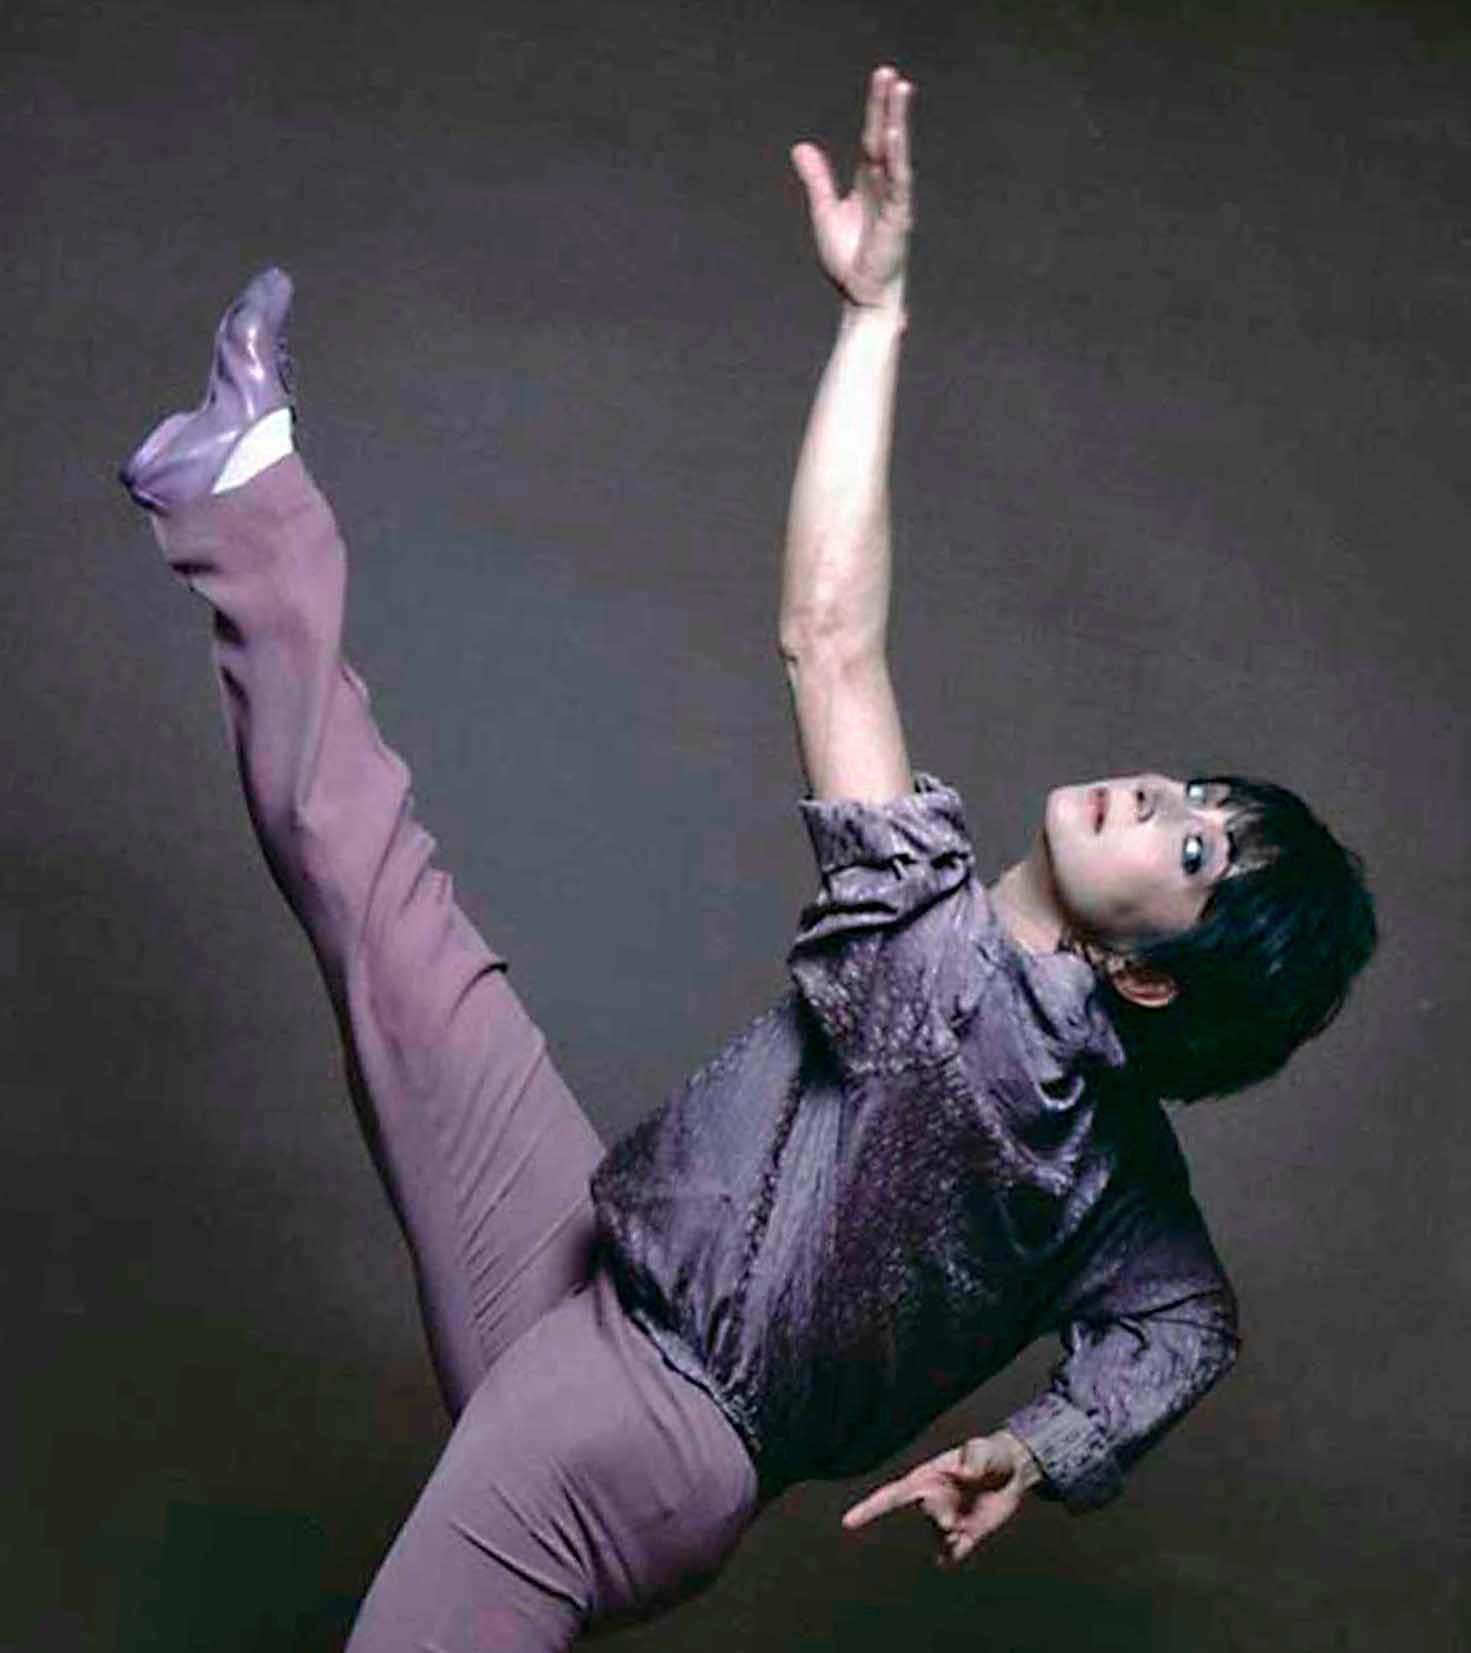 Dancer/Choreographer Twyla Tharp photographed for a Dance Magazine cover story - Photograph by Jack Mitchell